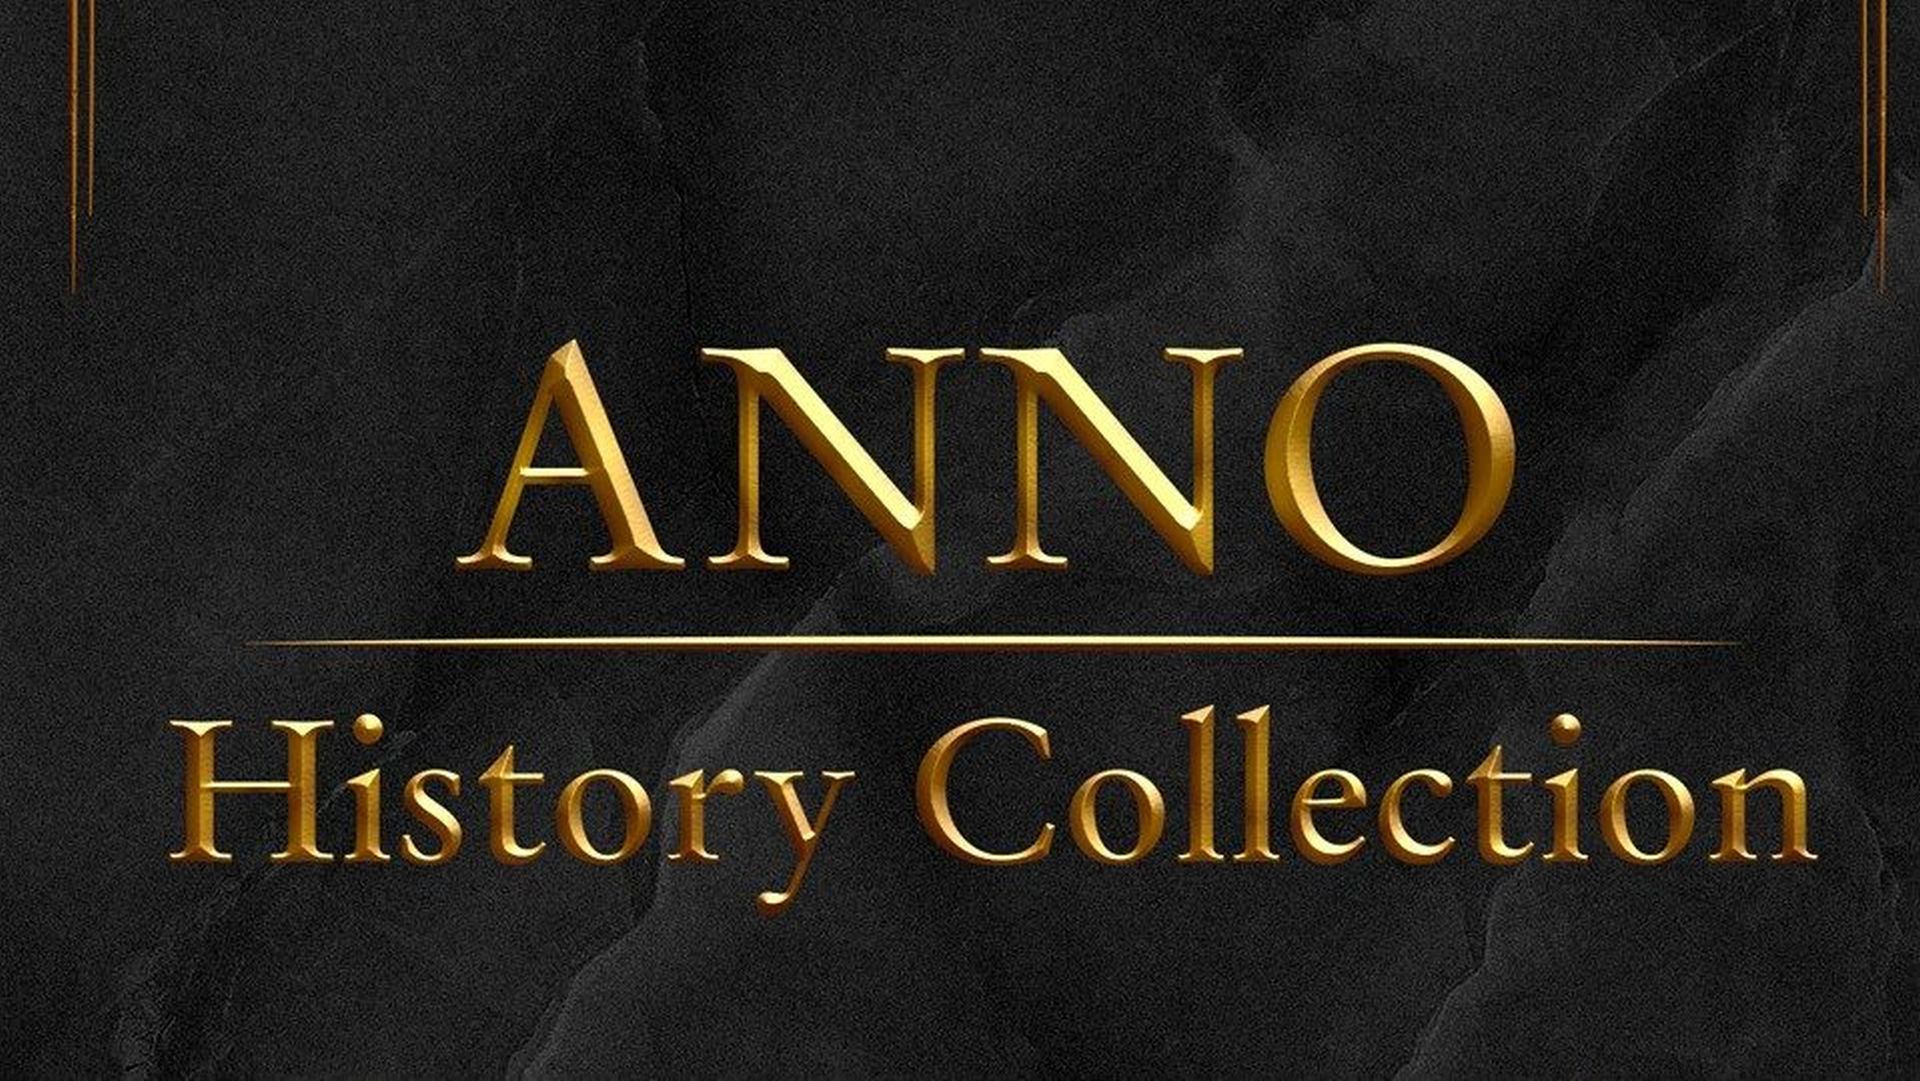 Anno History Collection Titles Contains Classic Support 4 With 4K Announced